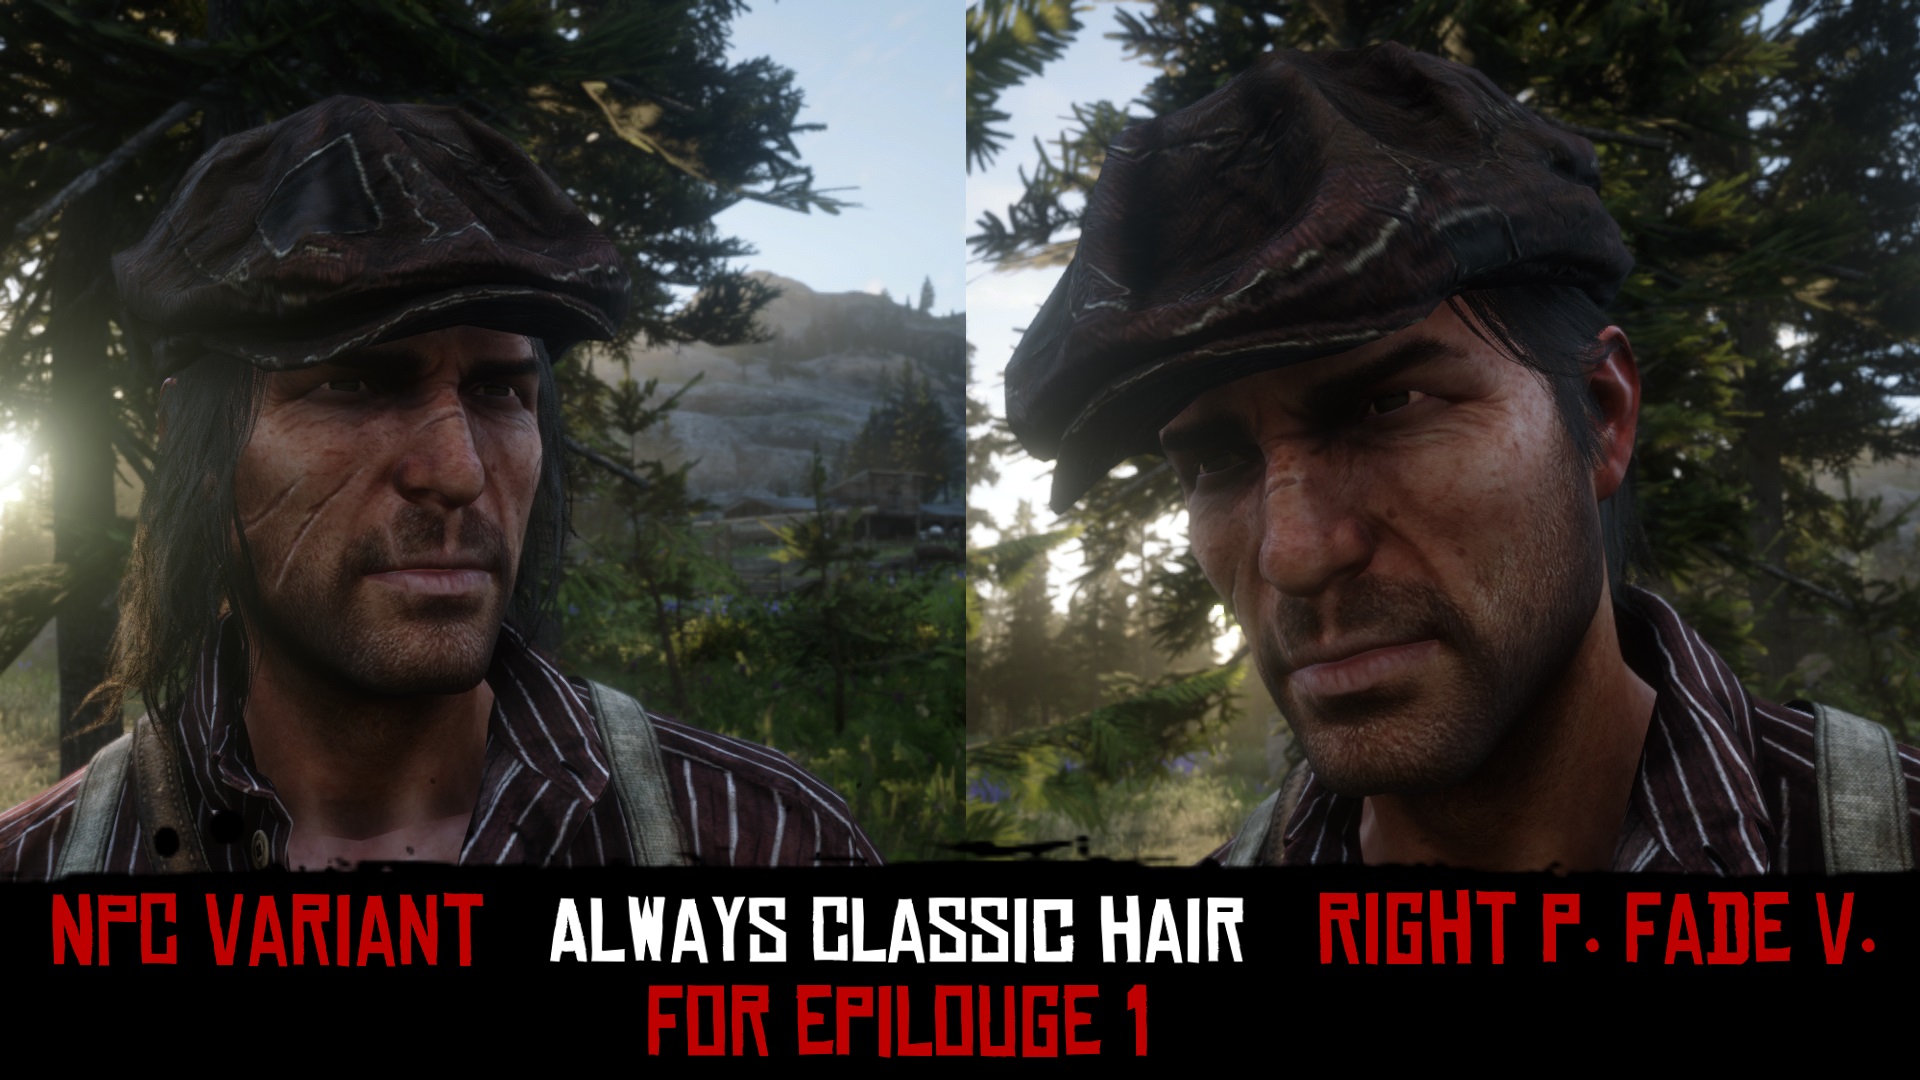 Always Classic Hair For Epilogue 1 (2 Variants)